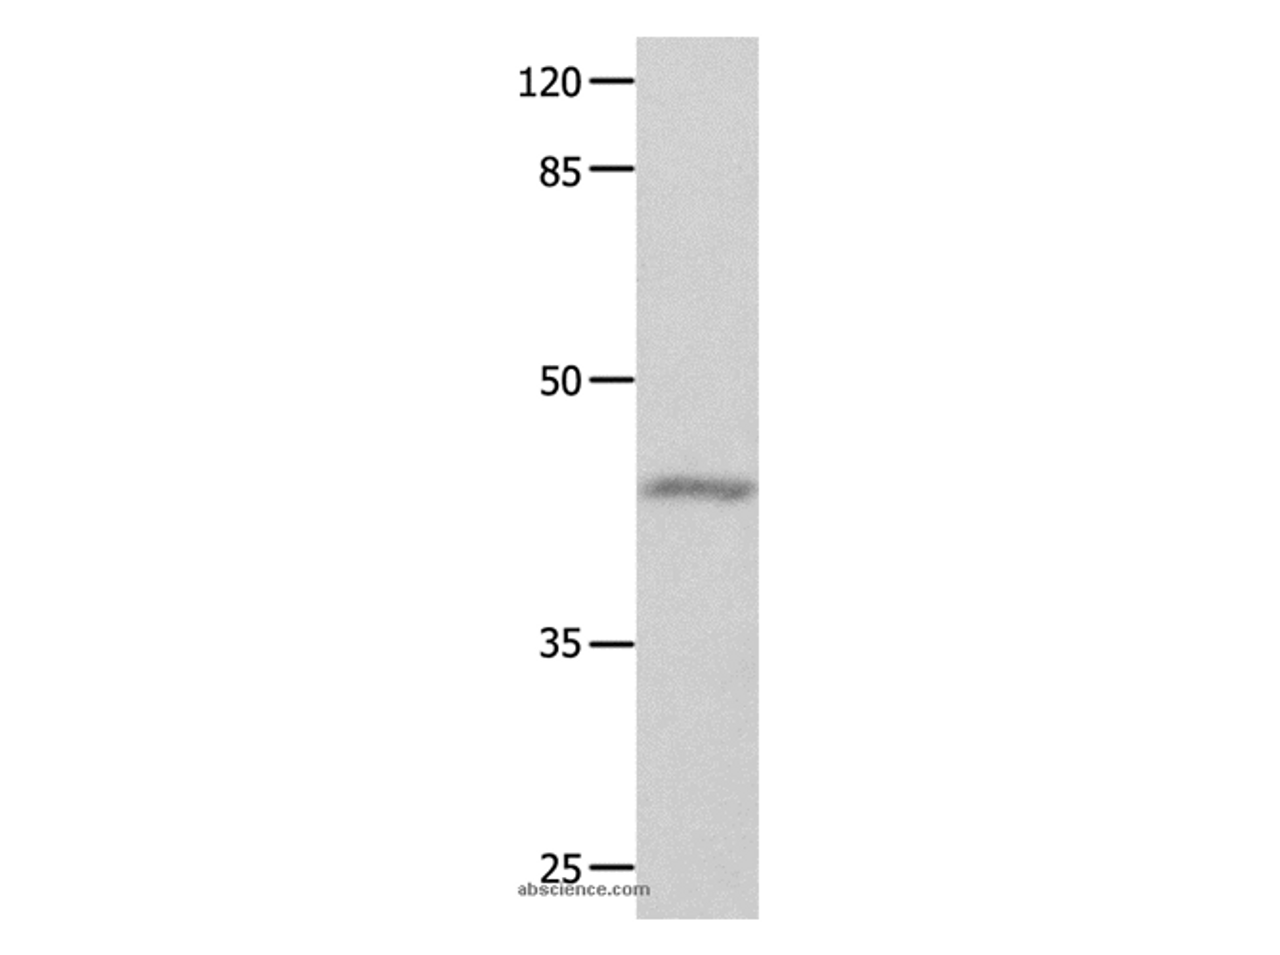 Western Blot analysis of Mouse eyes tissue using GNA11 Polyclonal Antibody at dilution of 1:550